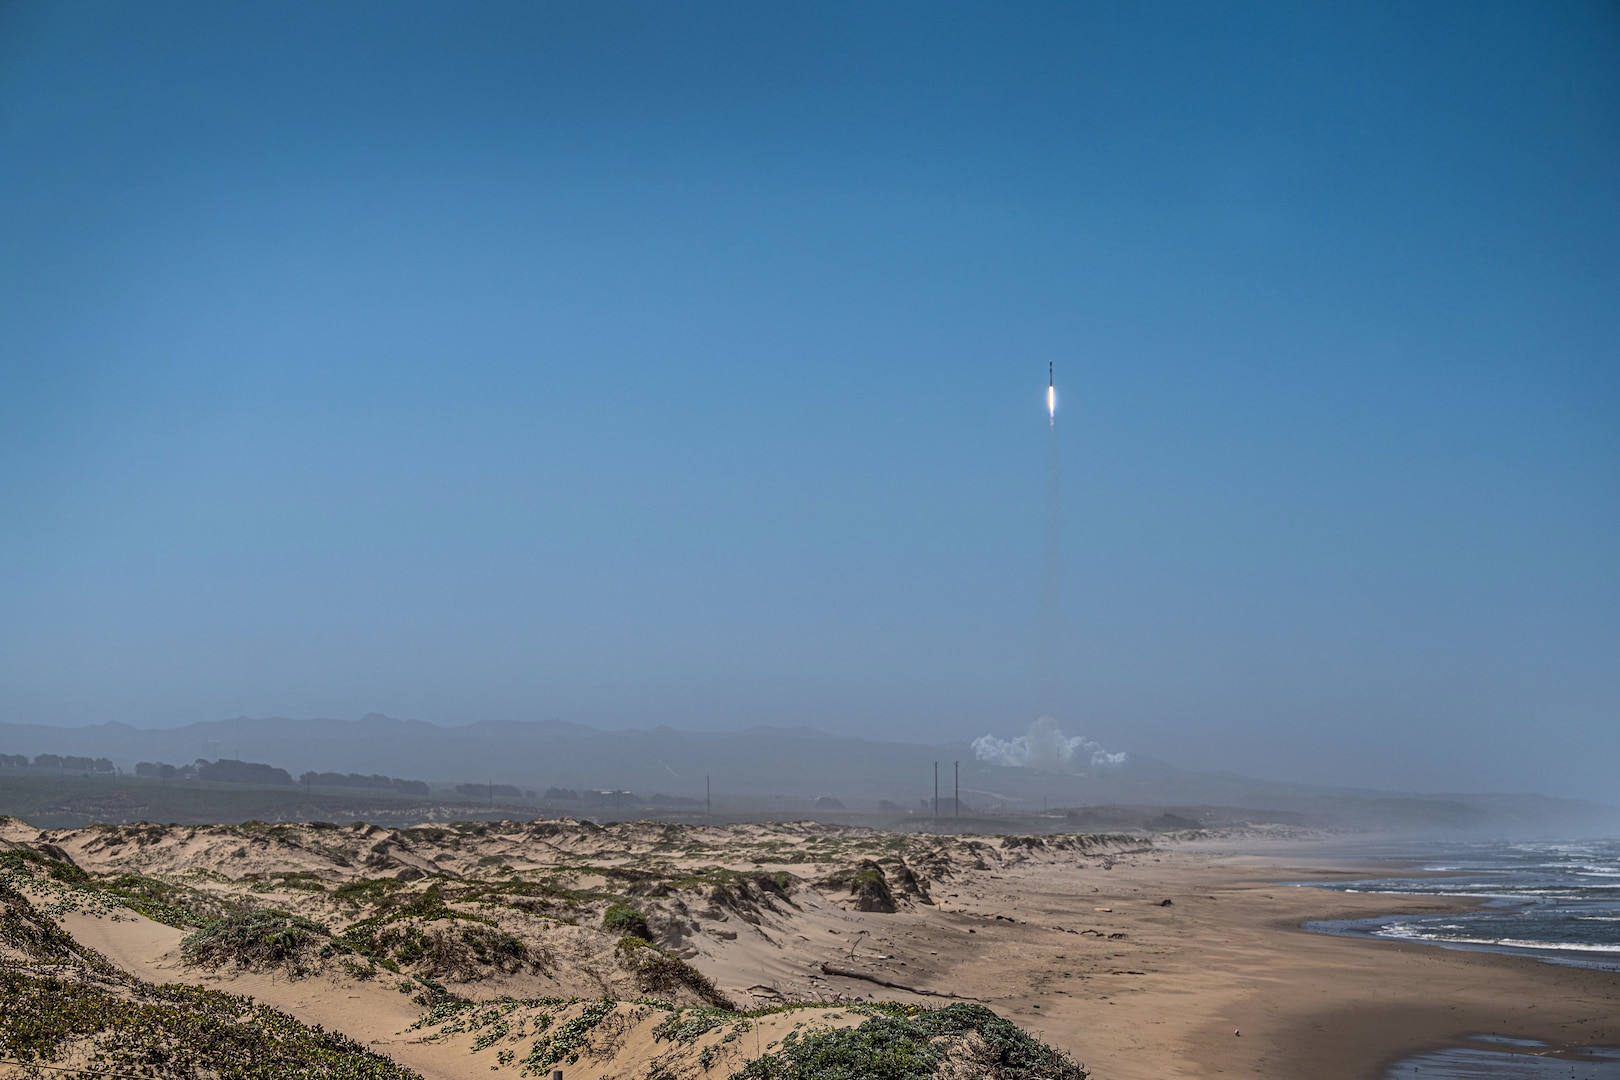 A SpaceX Falcon 9 rocket booster carrying a payload of two WorldView Legion satellites launched from Vandenberg Space Force Base, Calif., May 2, 2024. This launch marked a collaboration between the U.S. Space Forces – Space and Maxar Technologies, a commercial space company. This mission was supported by S4S’s CIC program, which fosters collaboration between the DoD and commercial space companies to deliver critical space capabilities. (U.S. Space Force photo by TSgt. Luke Kitterman)